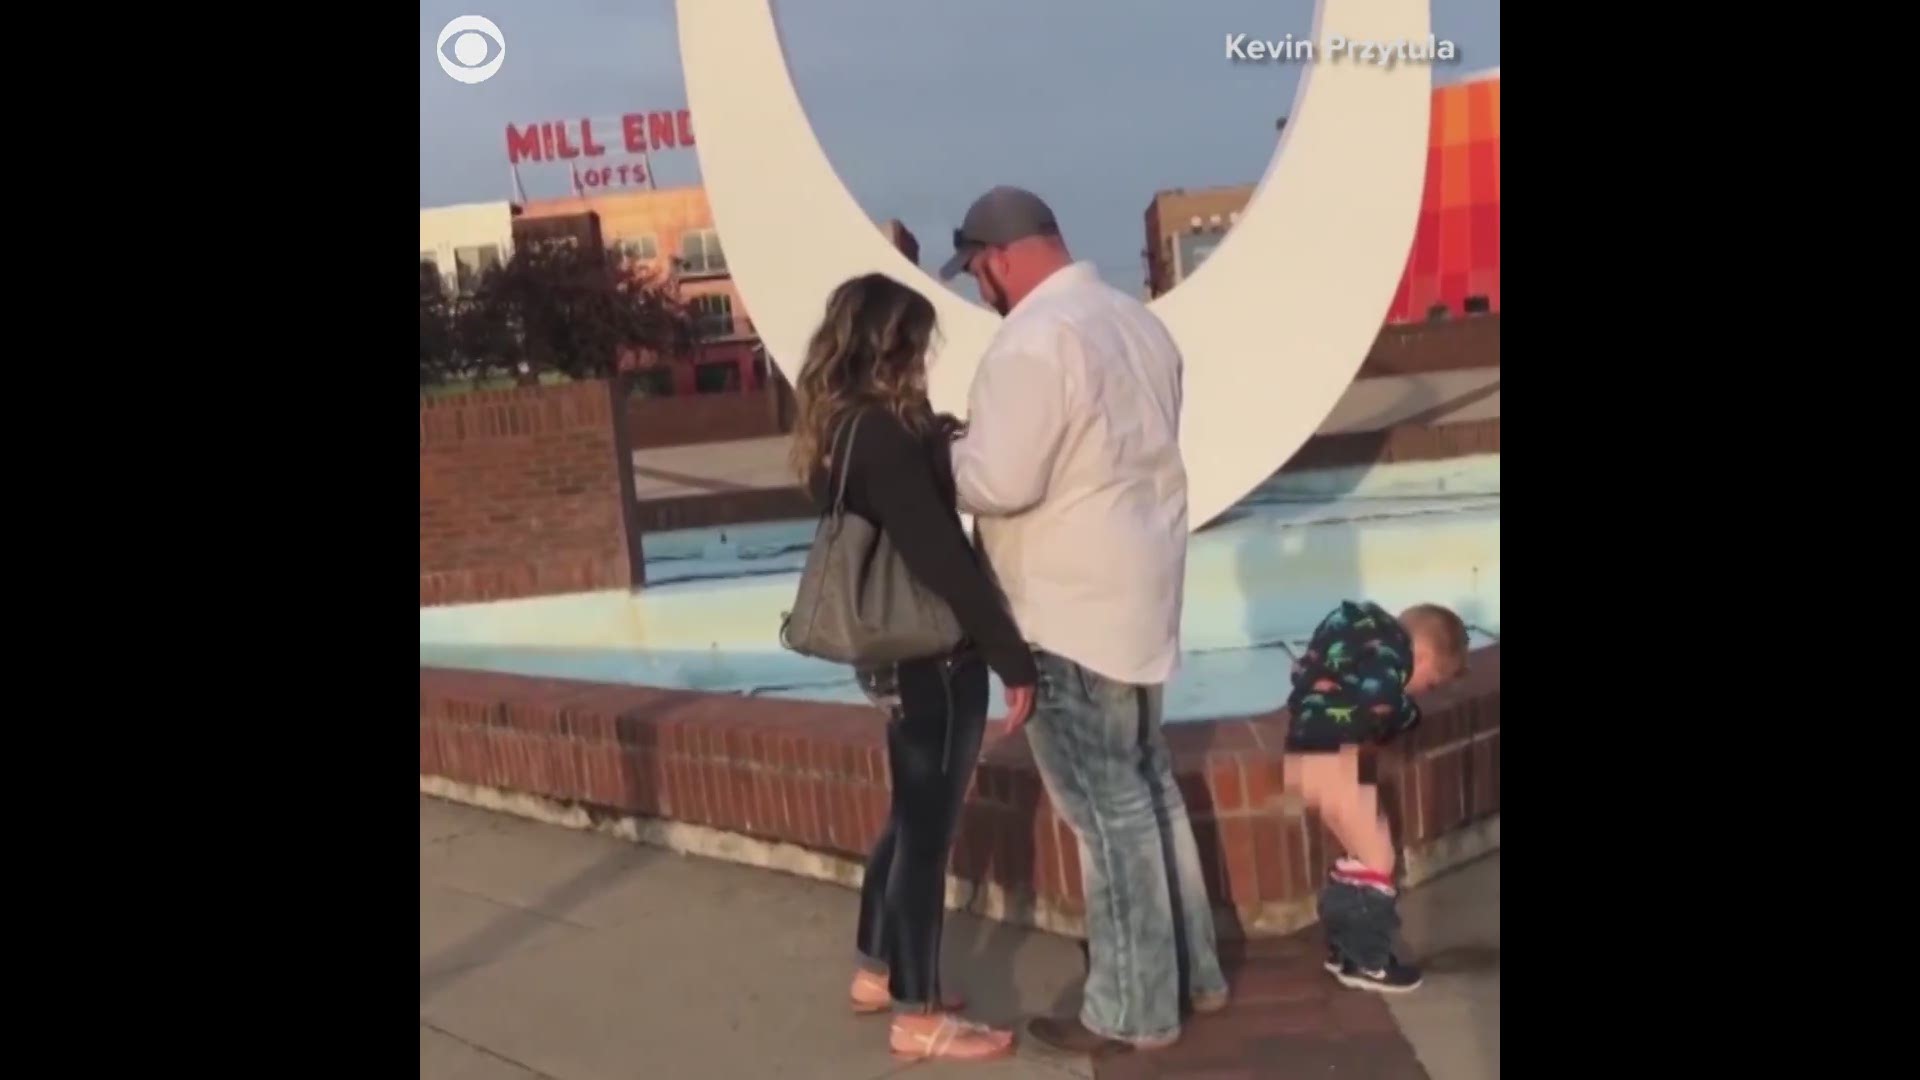 Just after Kevin Przytula dropped to his knee to propose to girlfriend, her son -- Owen -- dropped his pants and starts beeing